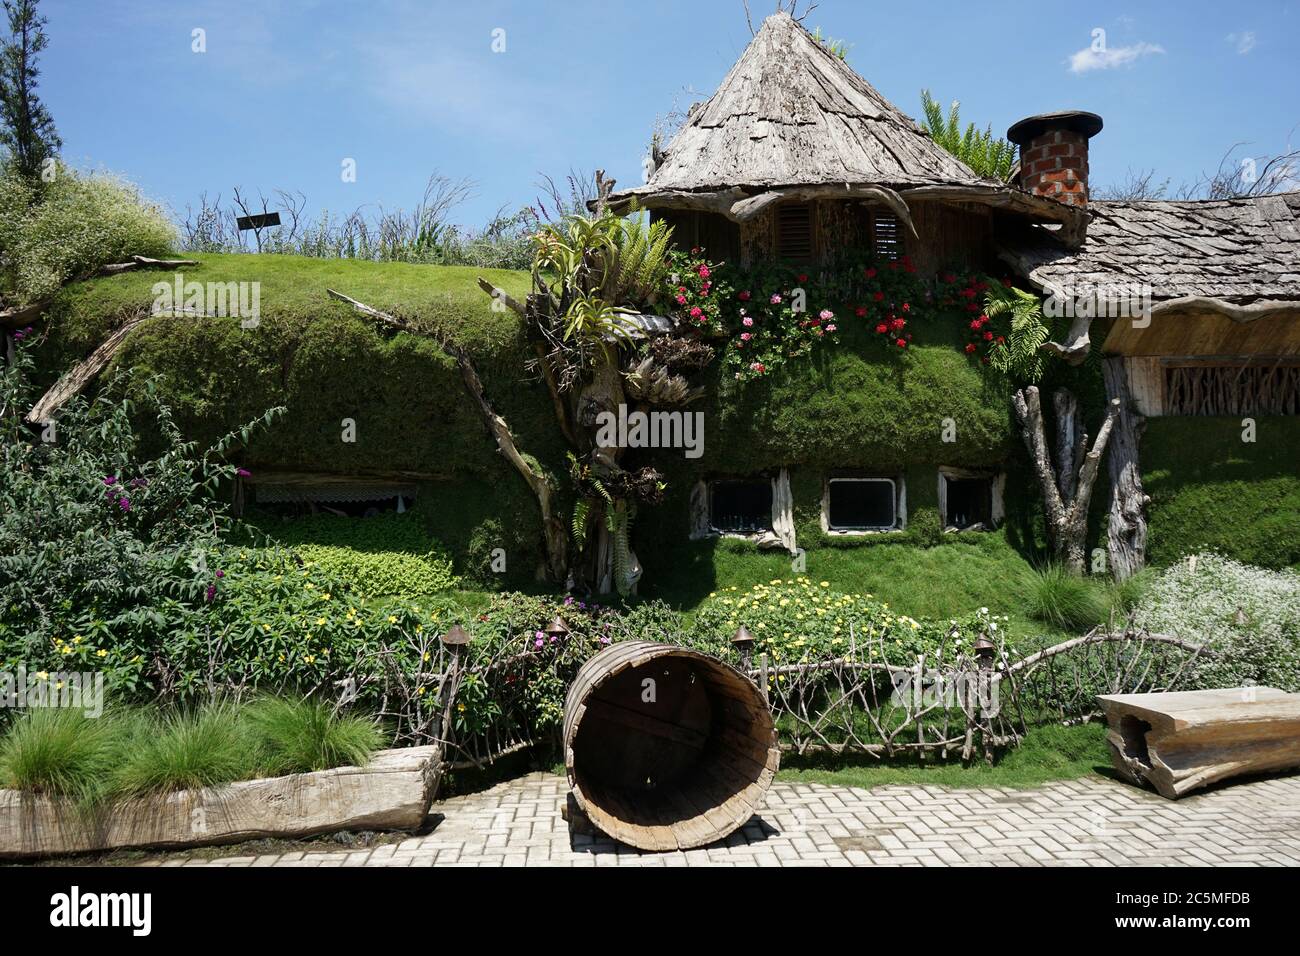 Farmhouse Susu Lembang Bandung City Indonesia Taken On September 2018 The Term Park With Hobbit House Concept In Bandung City Stock Photo Alamy